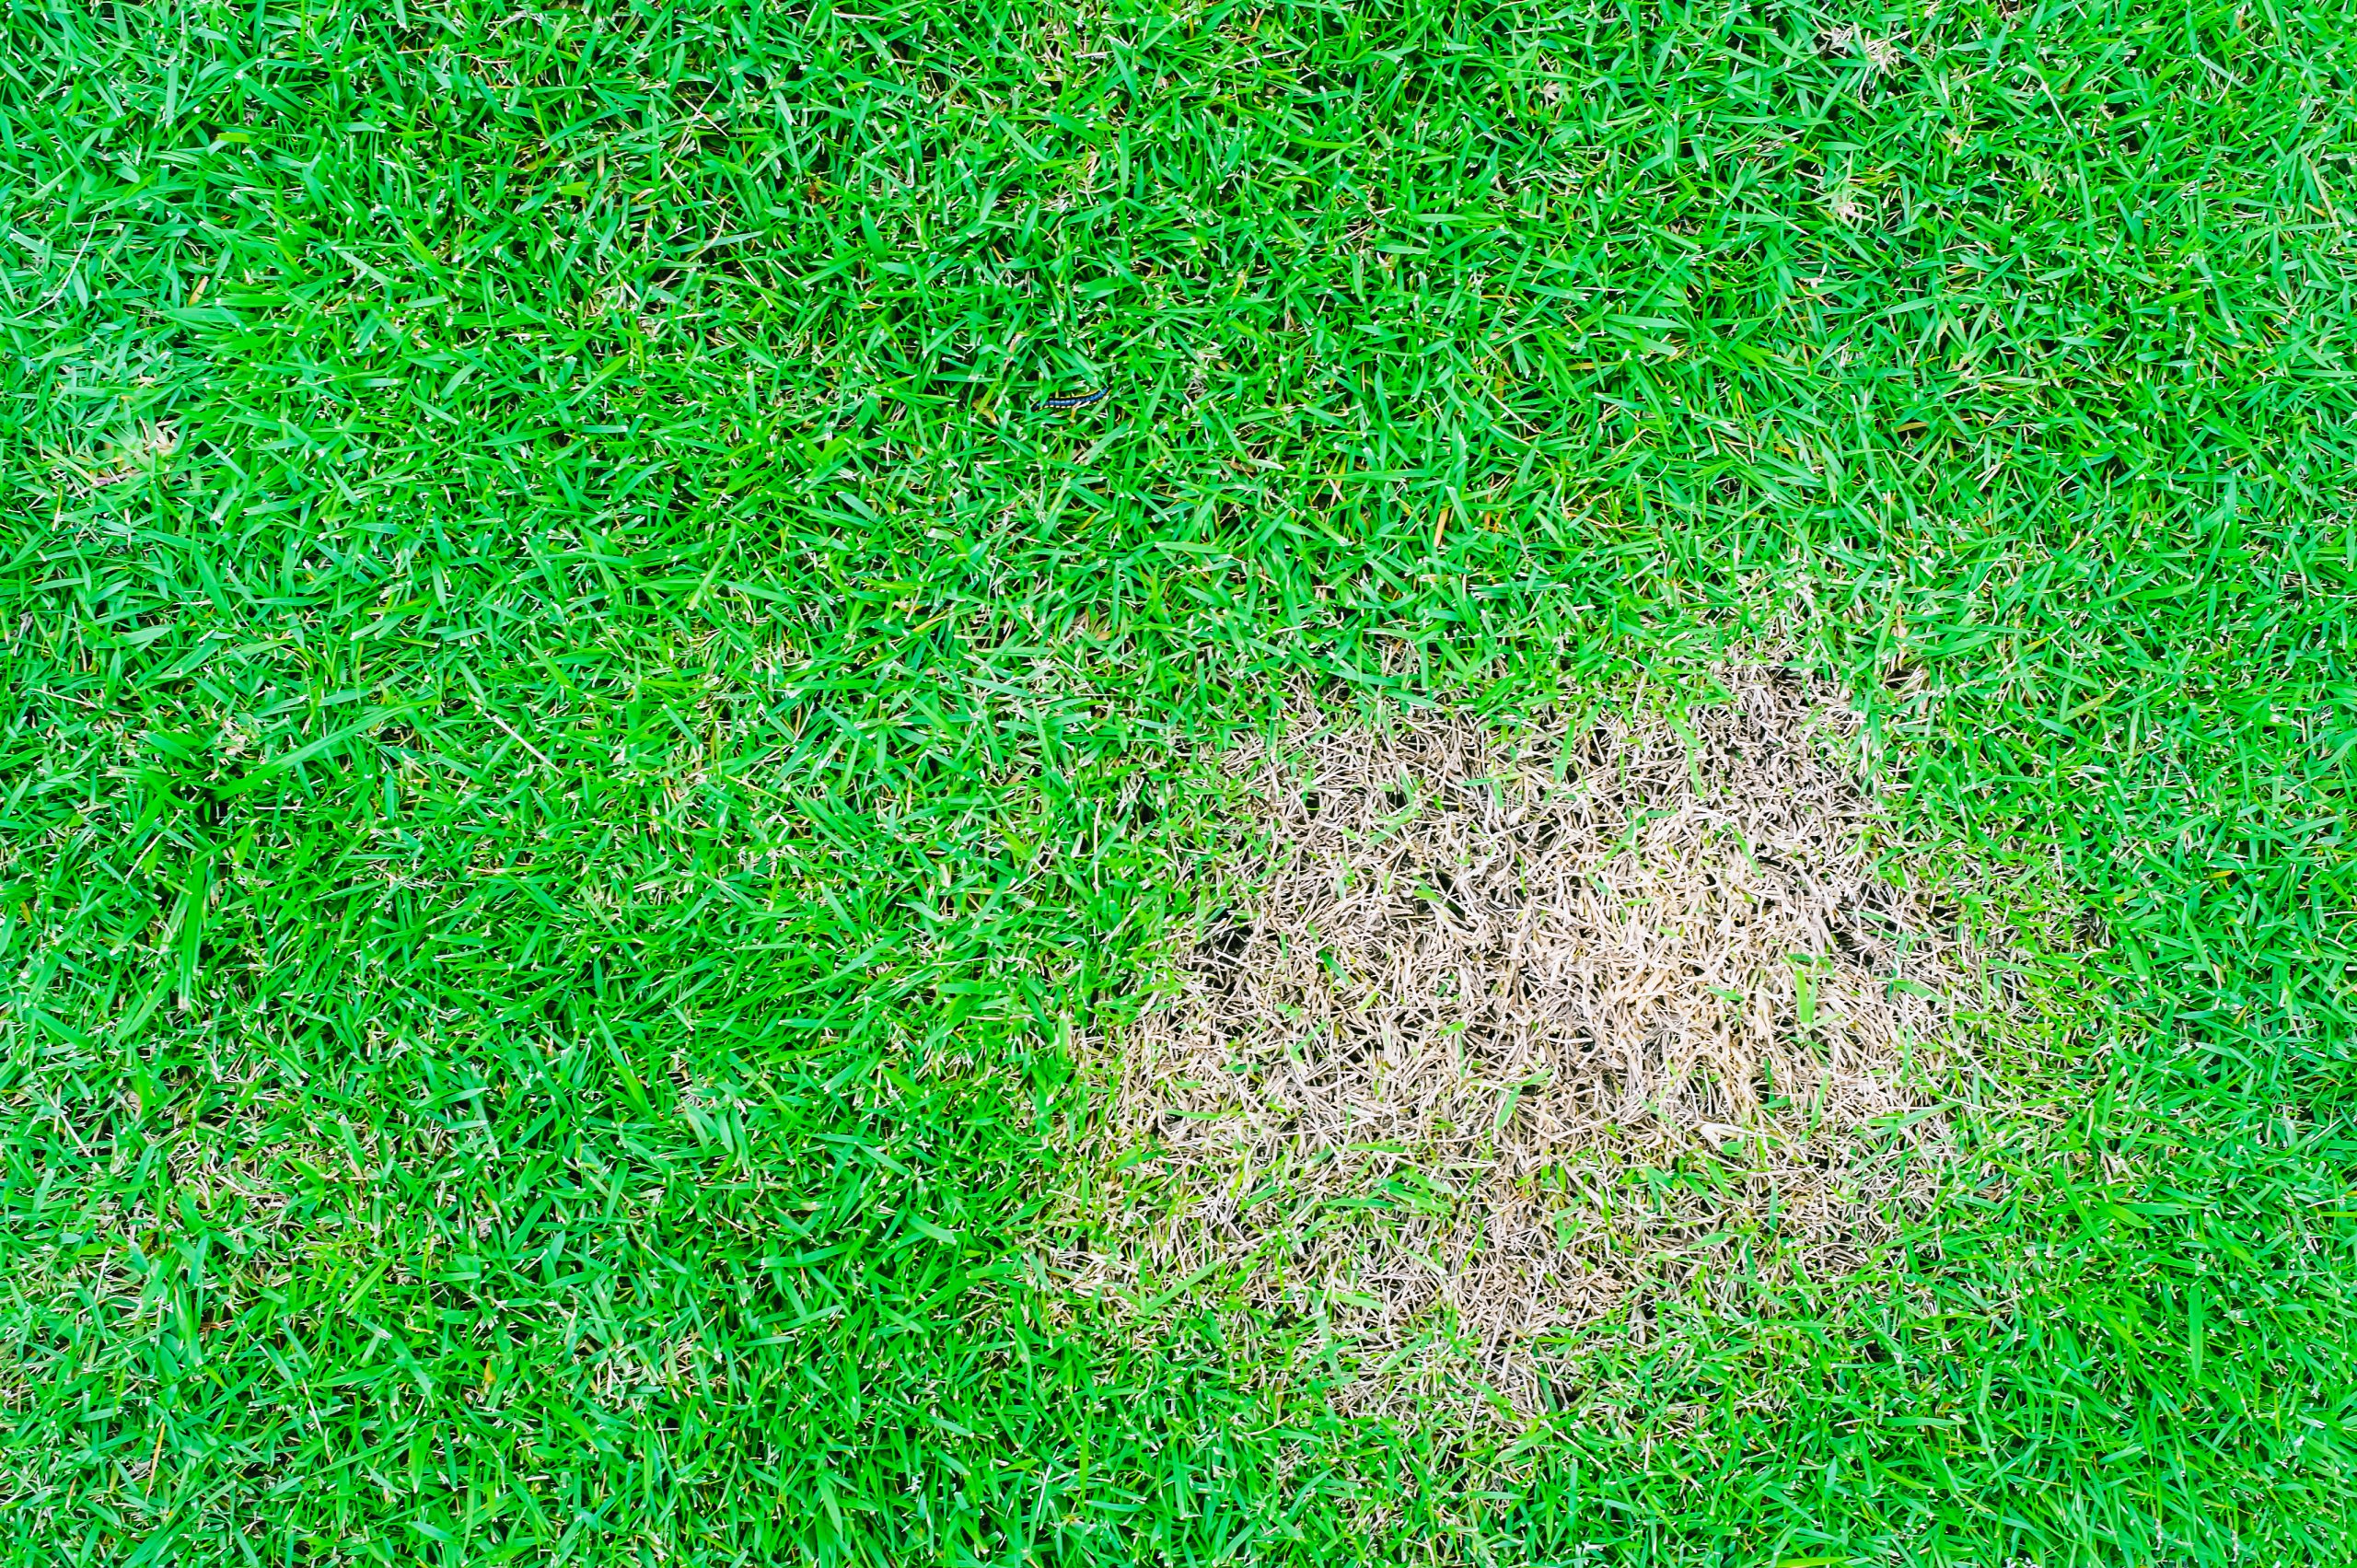 common lawn diseases, lawn care, maintenance, fungal diseases, brown patch, red thread, rust disease, snow mold, summer patch